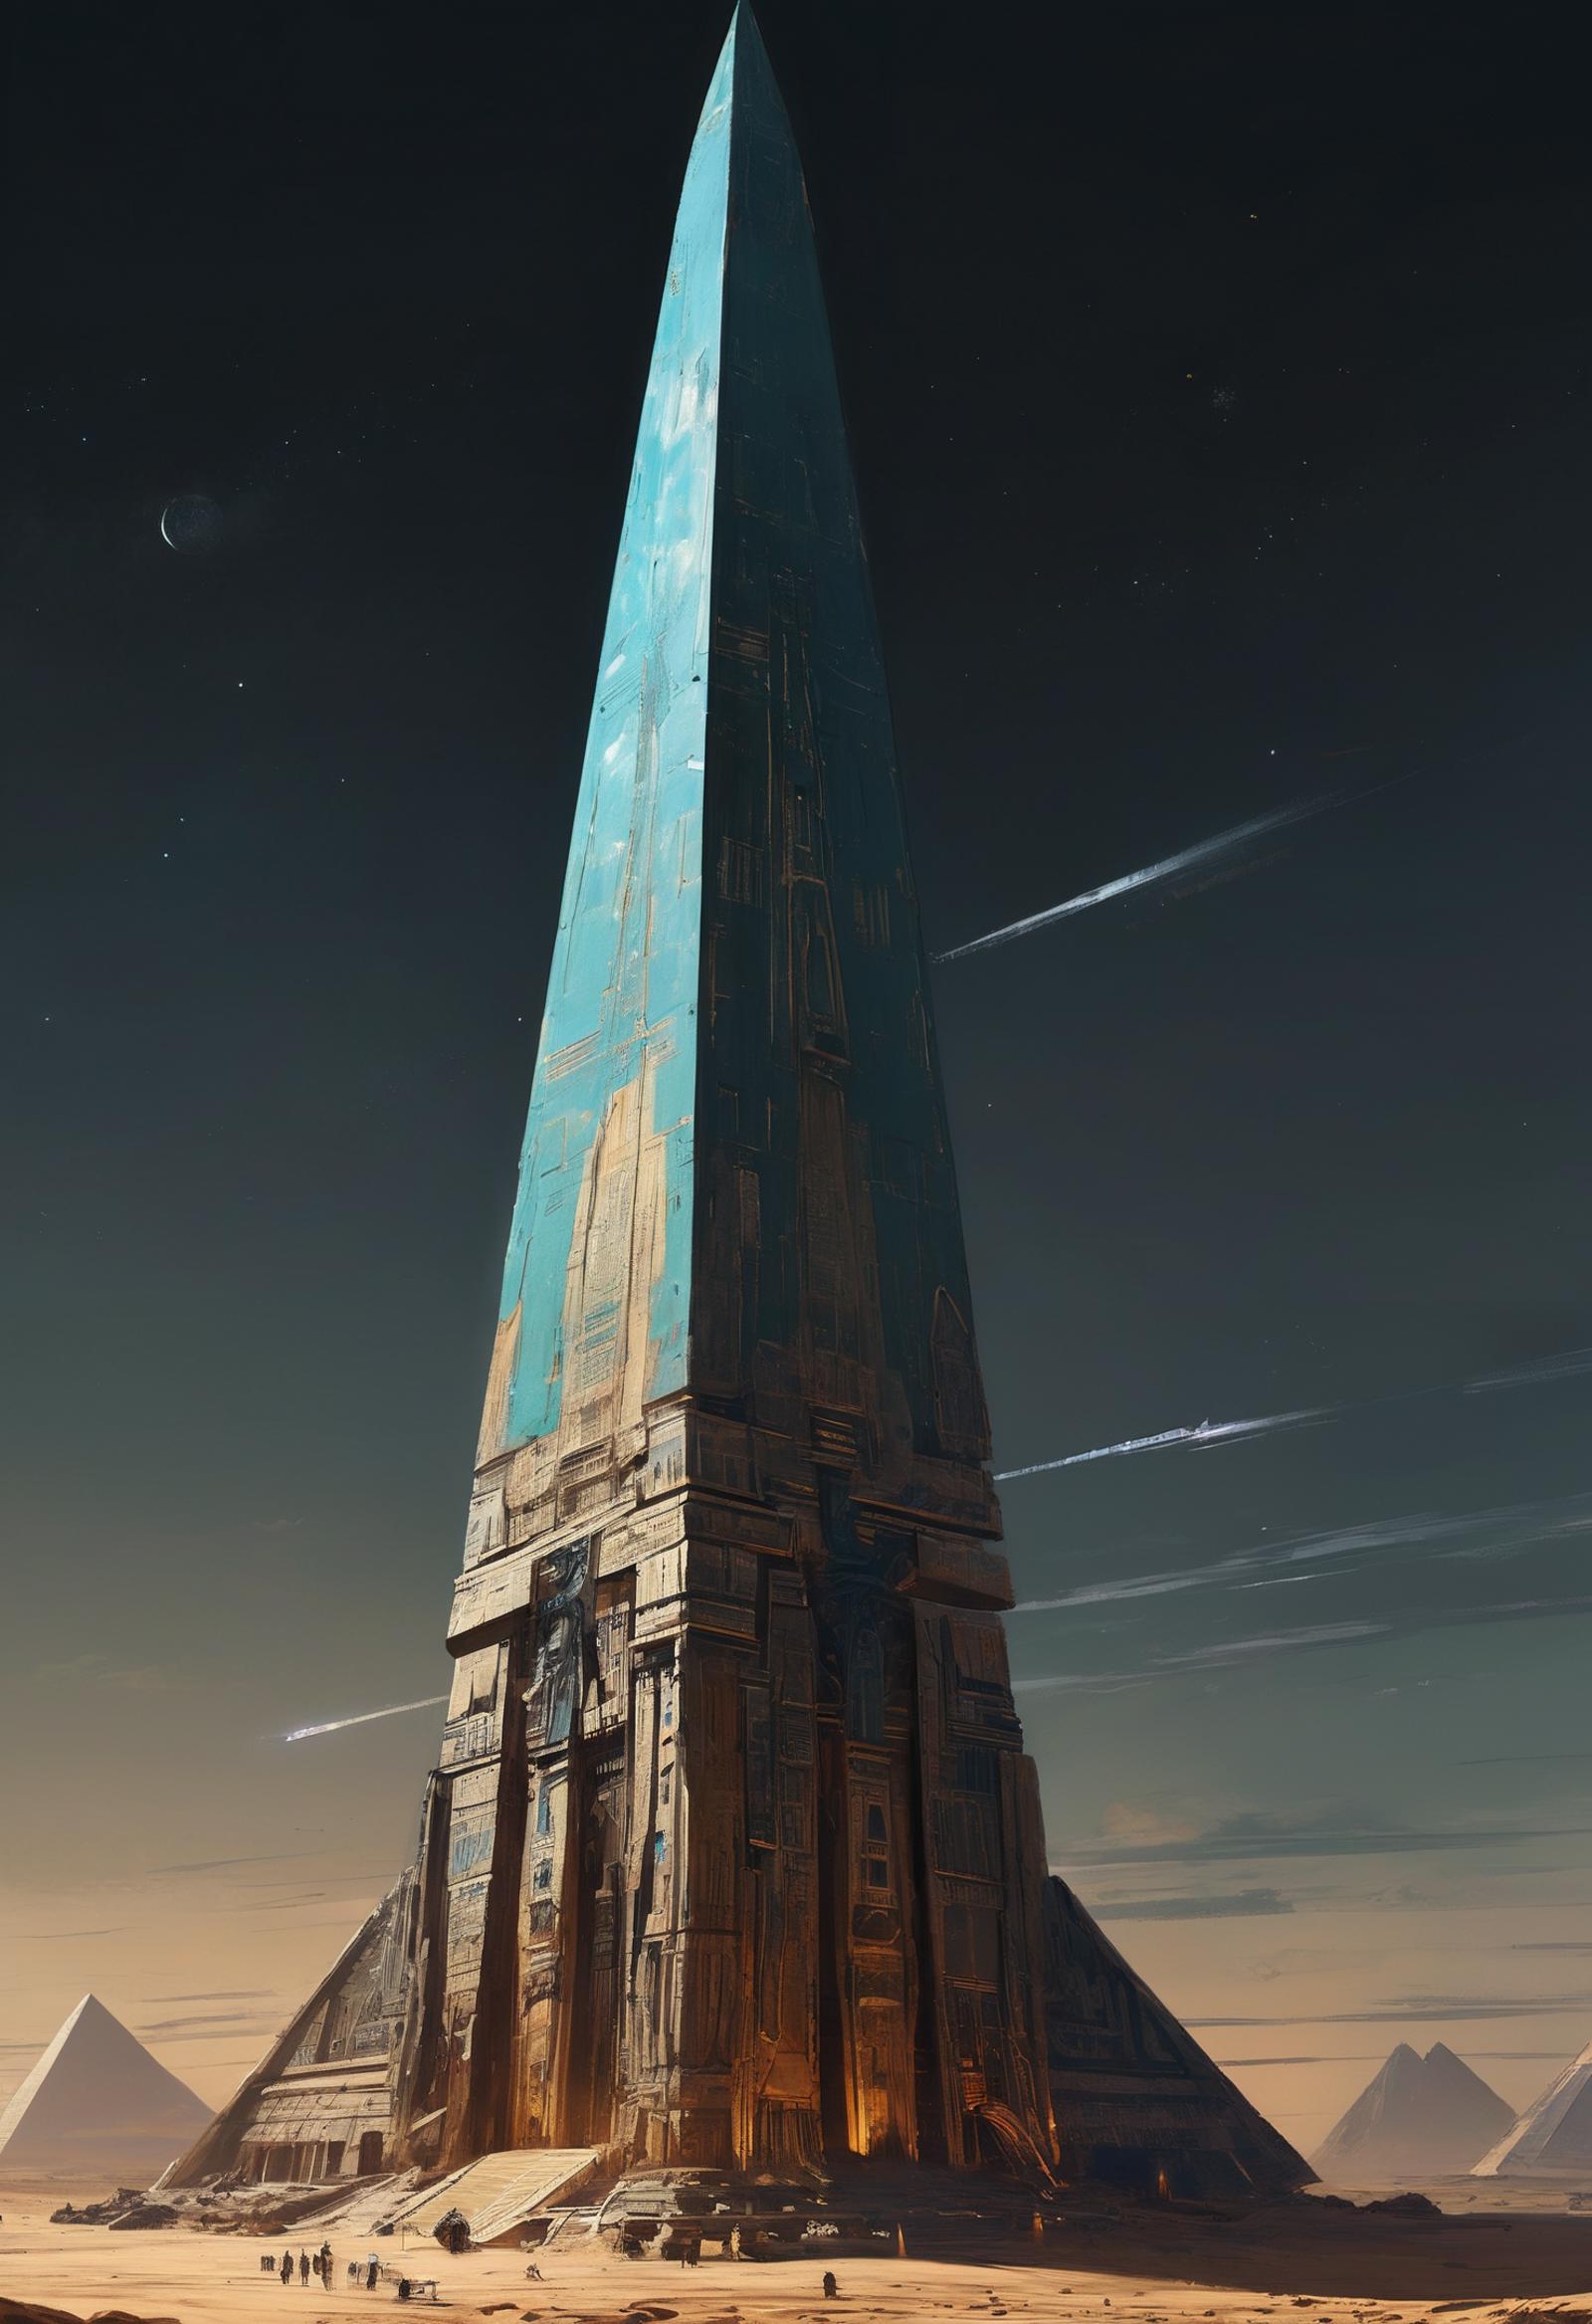 A futuristic tower with a blue top and a spaceship flying nearby.